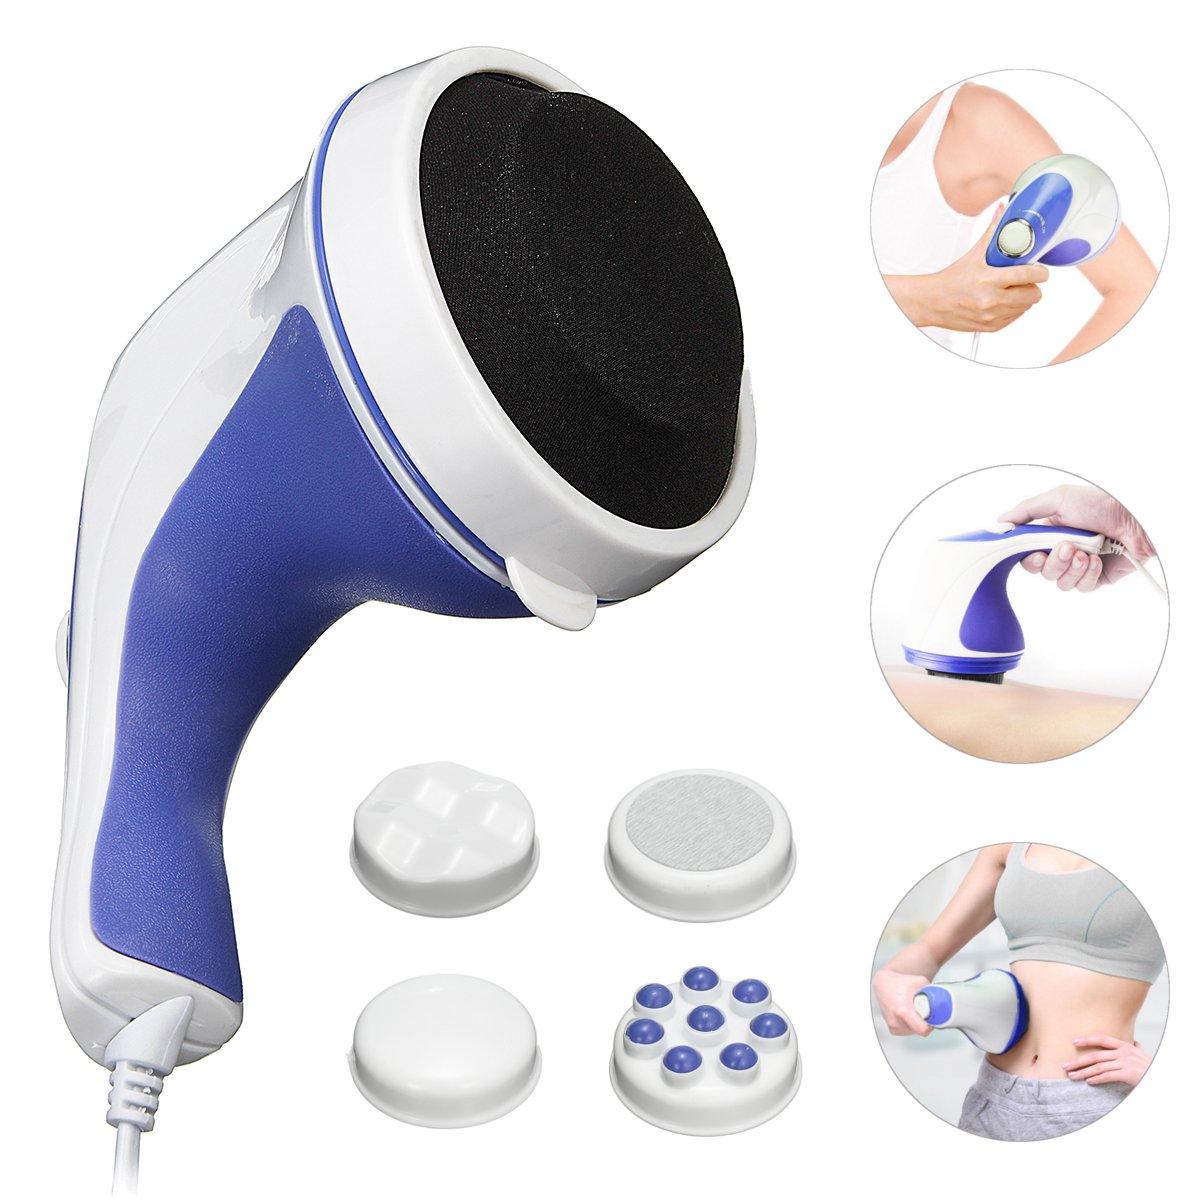 

220V Electric Massager Body Massage Back Neck Shoulder Leg Foot Pain Relief Vibrating Handheld Therapy Machine